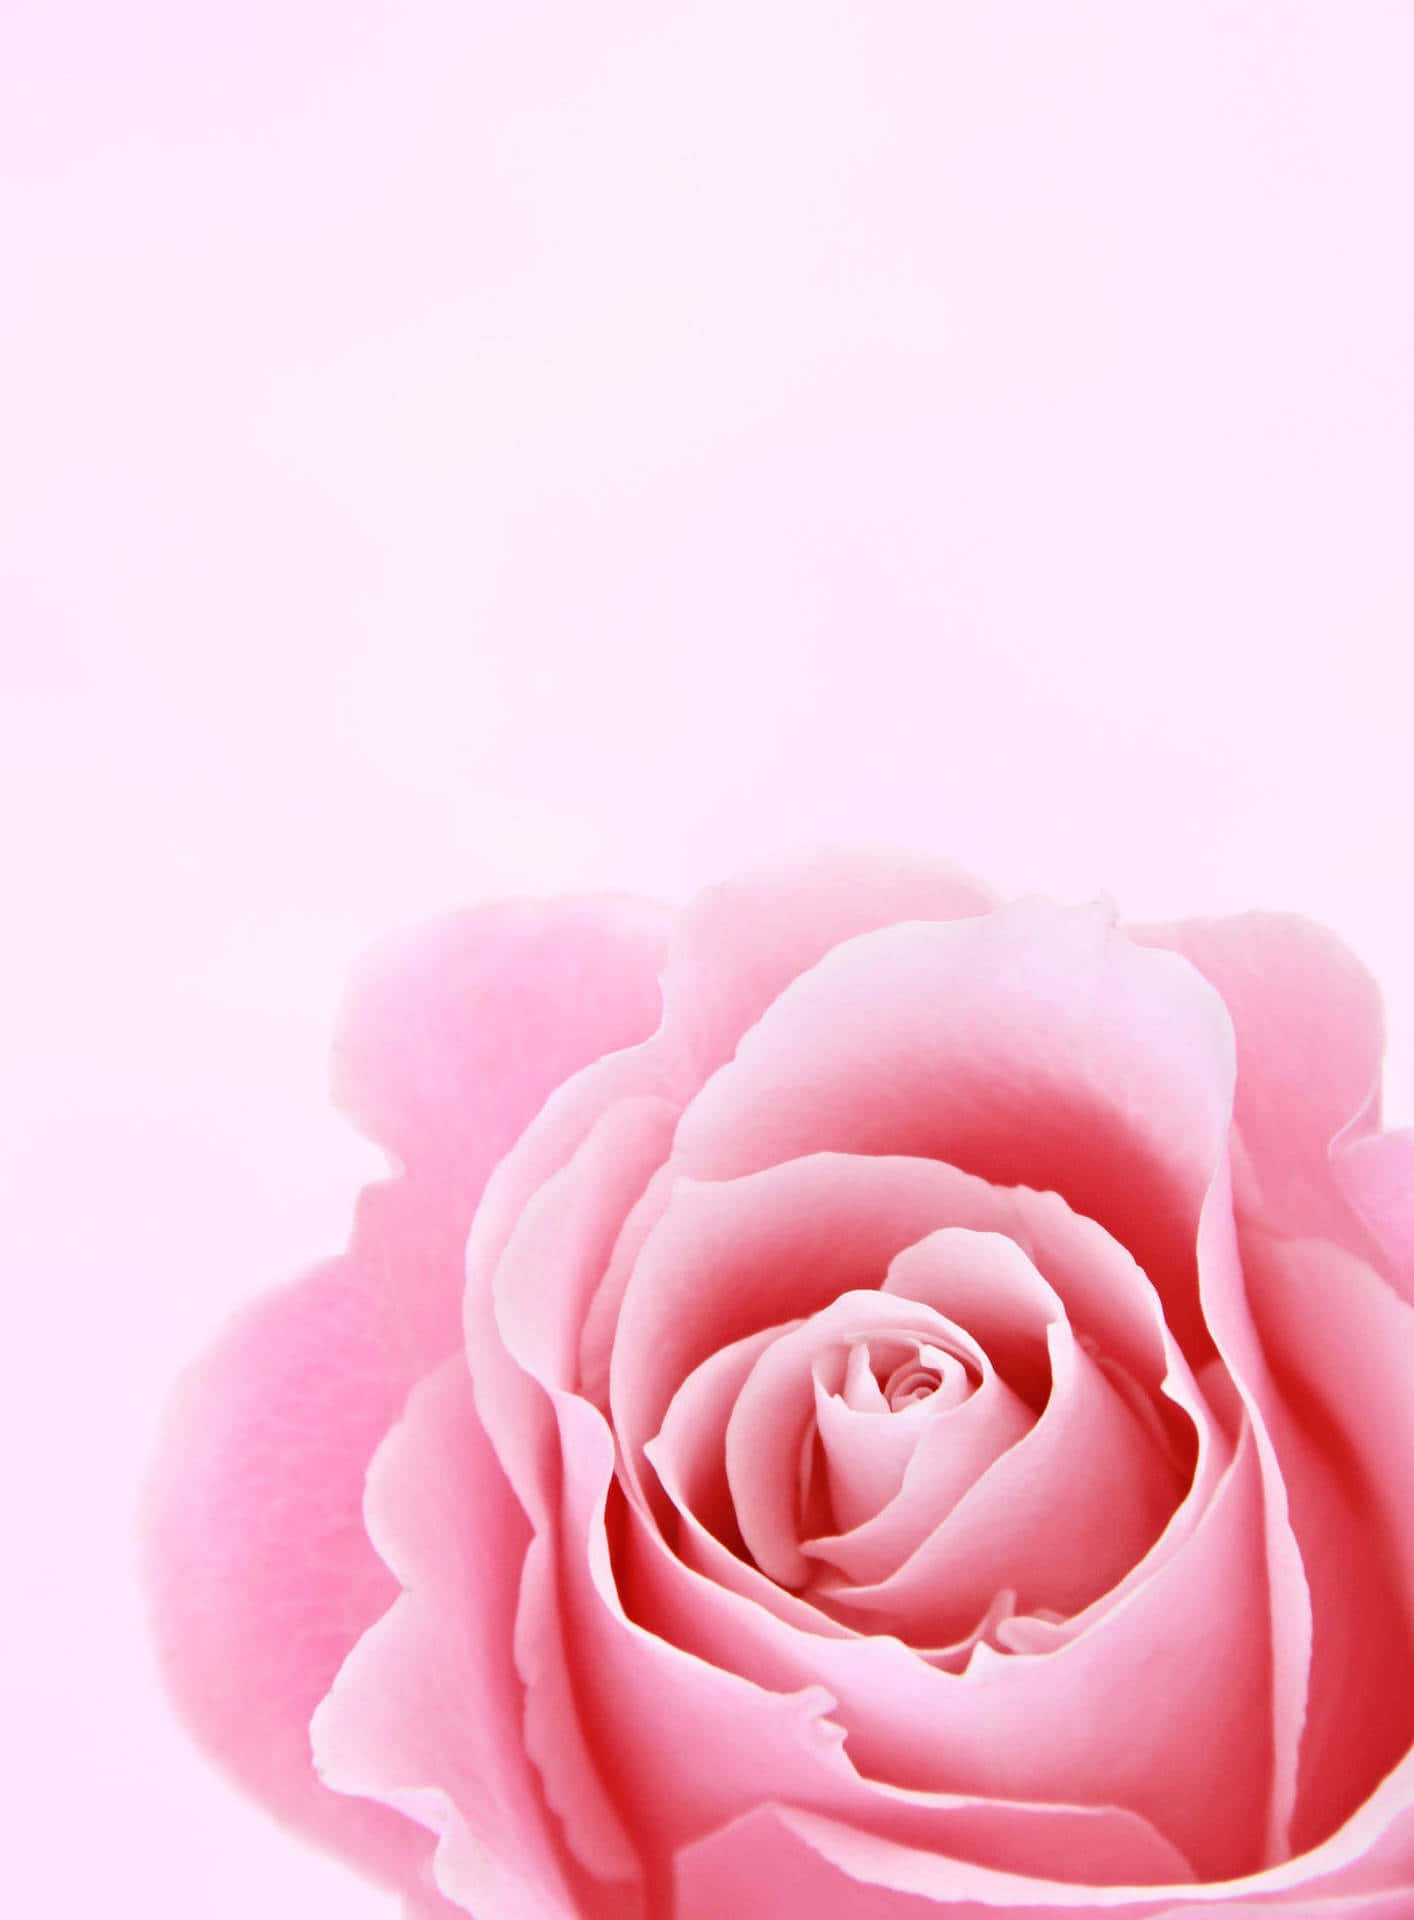 Caption: Blooming Aesthetic Rose Background